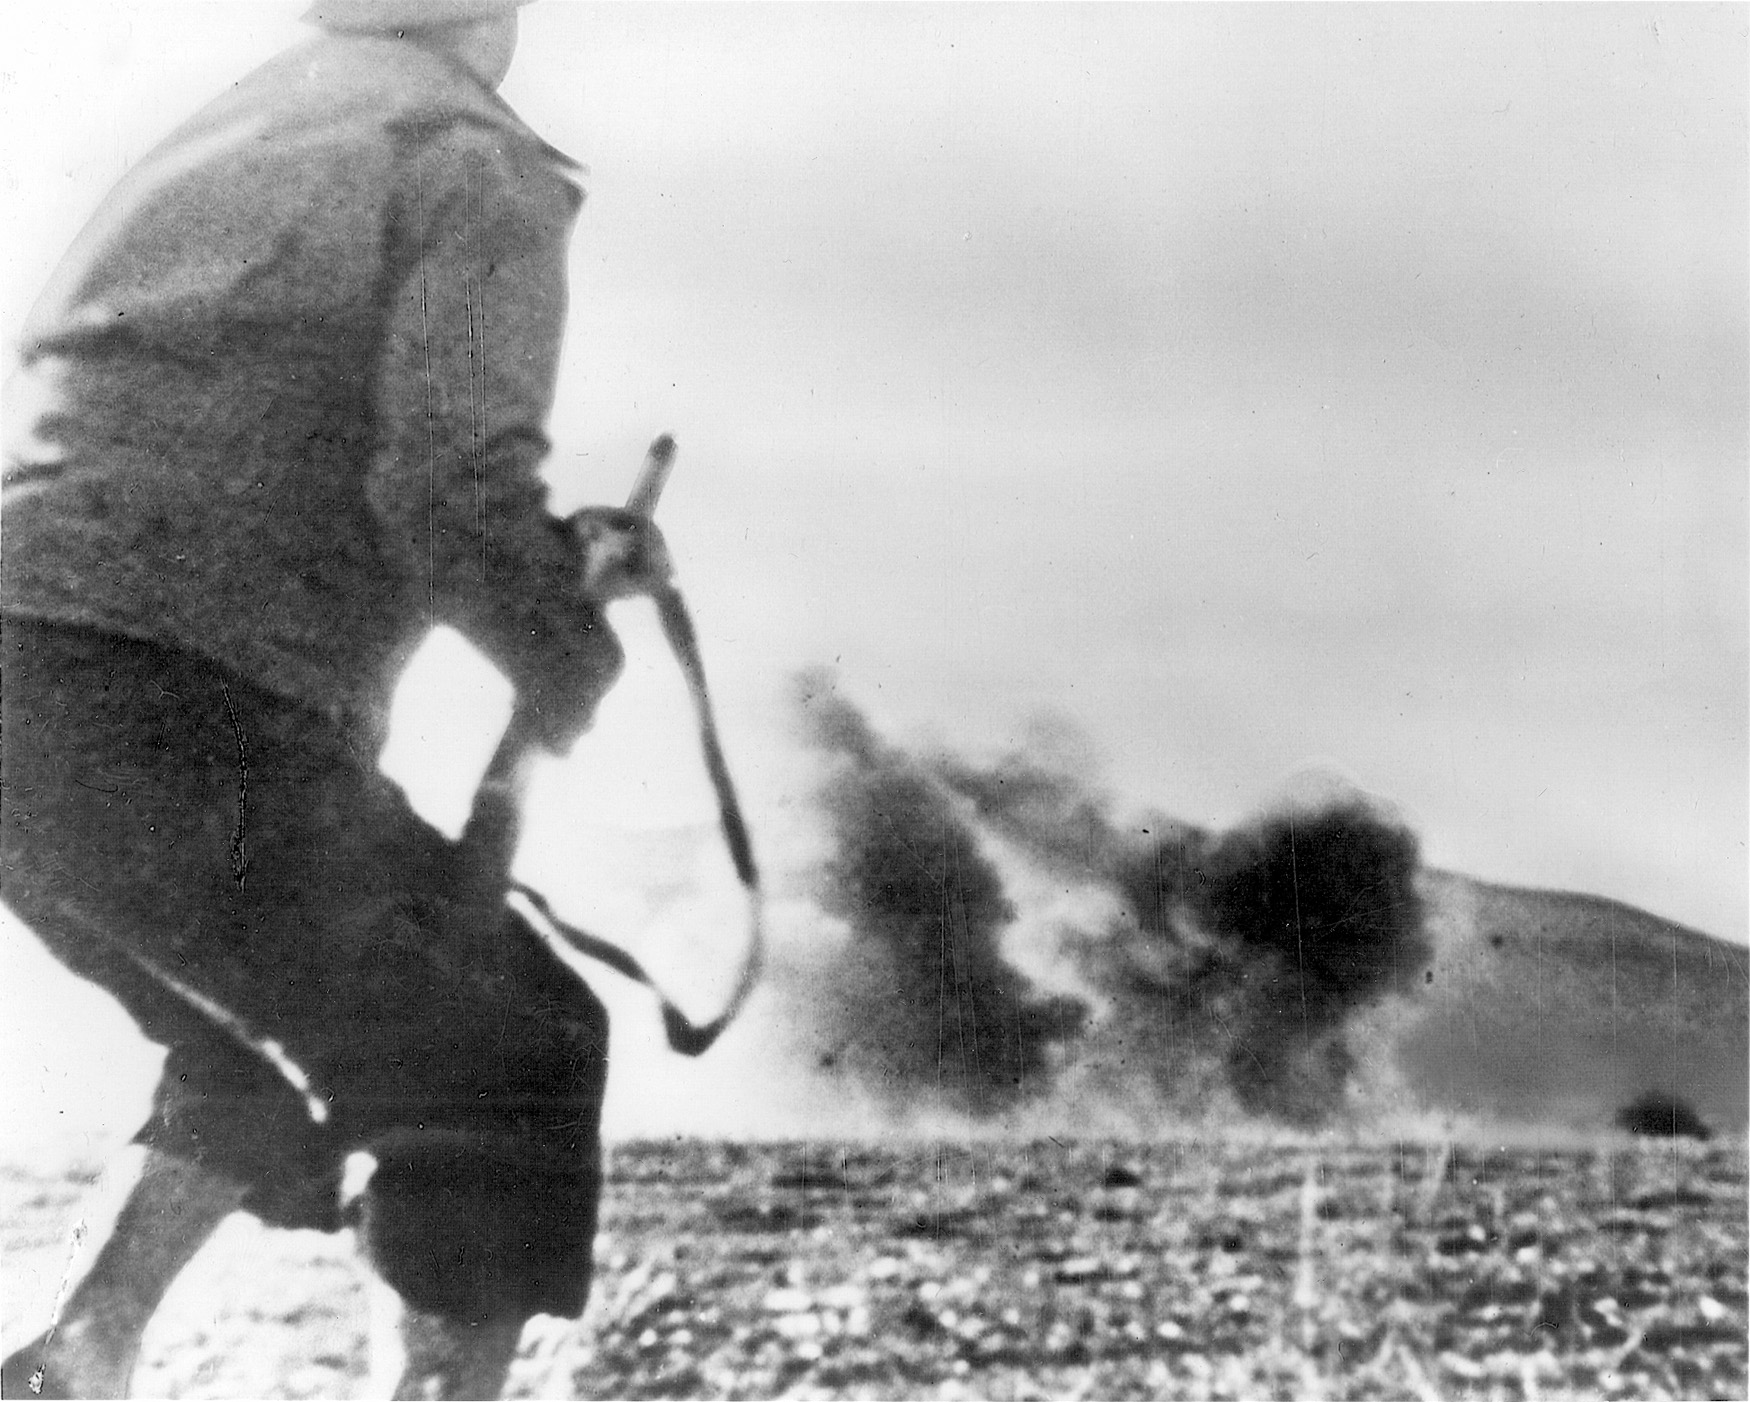 The blast of a German bomb rattles a GI on the move.